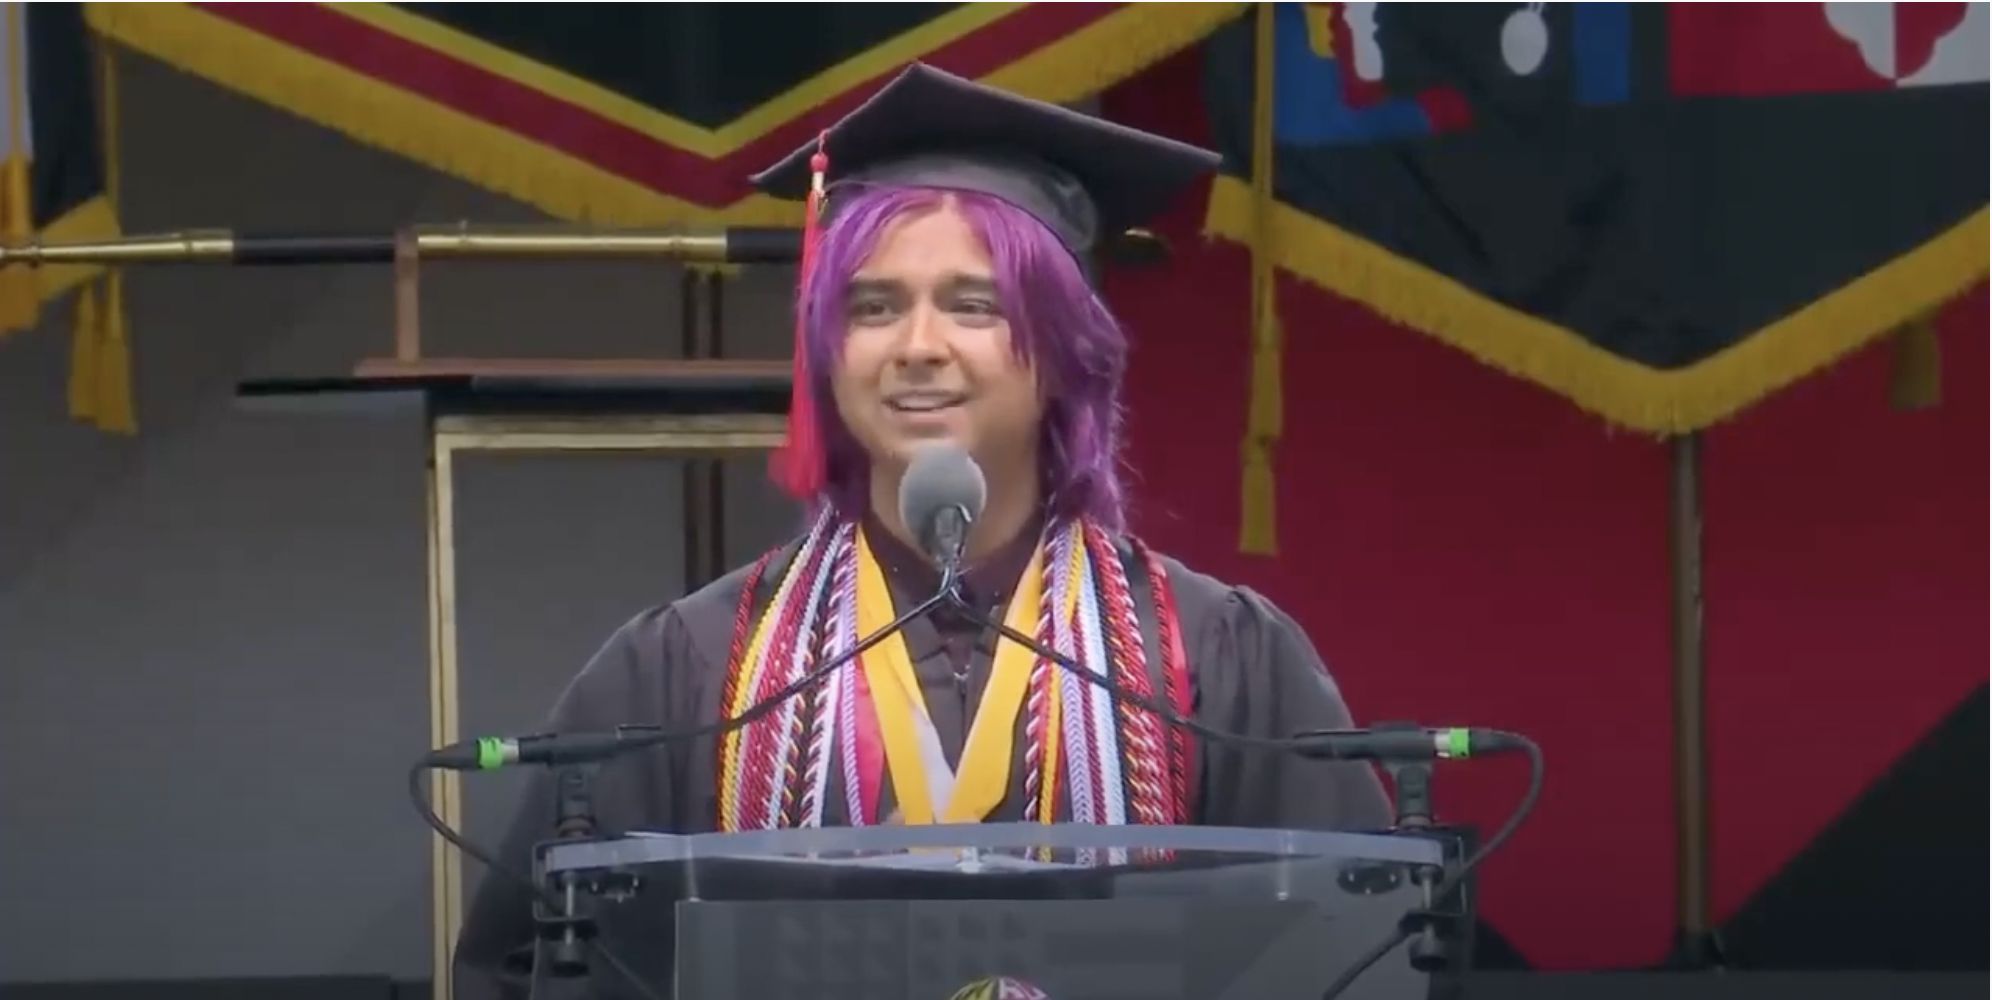 M Pease 2022 commencement address